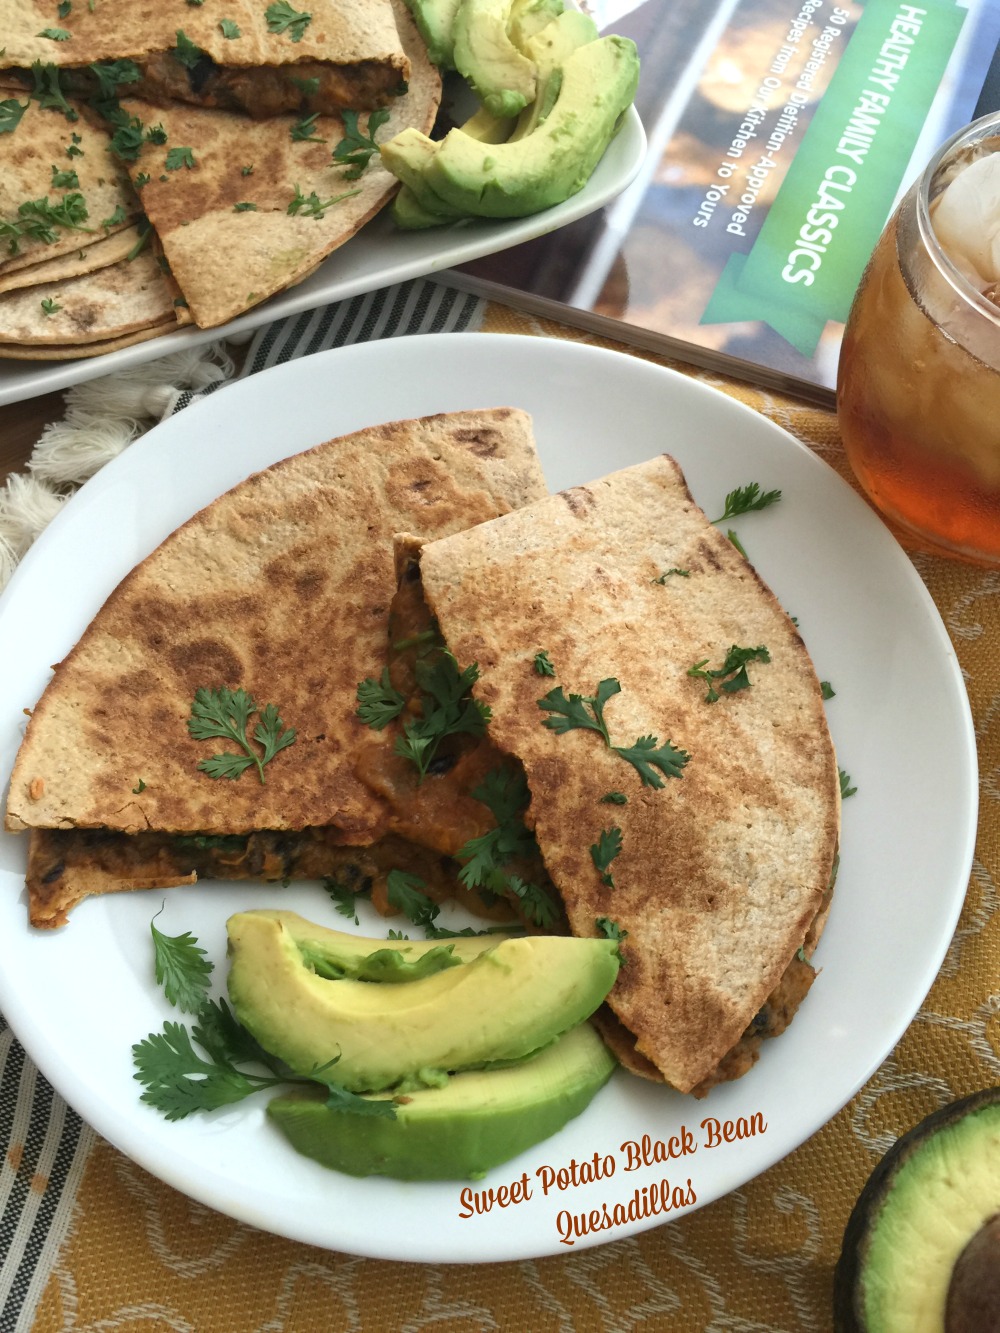 Sweet Potato Black Bean Quesadillas inspired by the Healthy Family Classics Cookbook from Produce for Kids